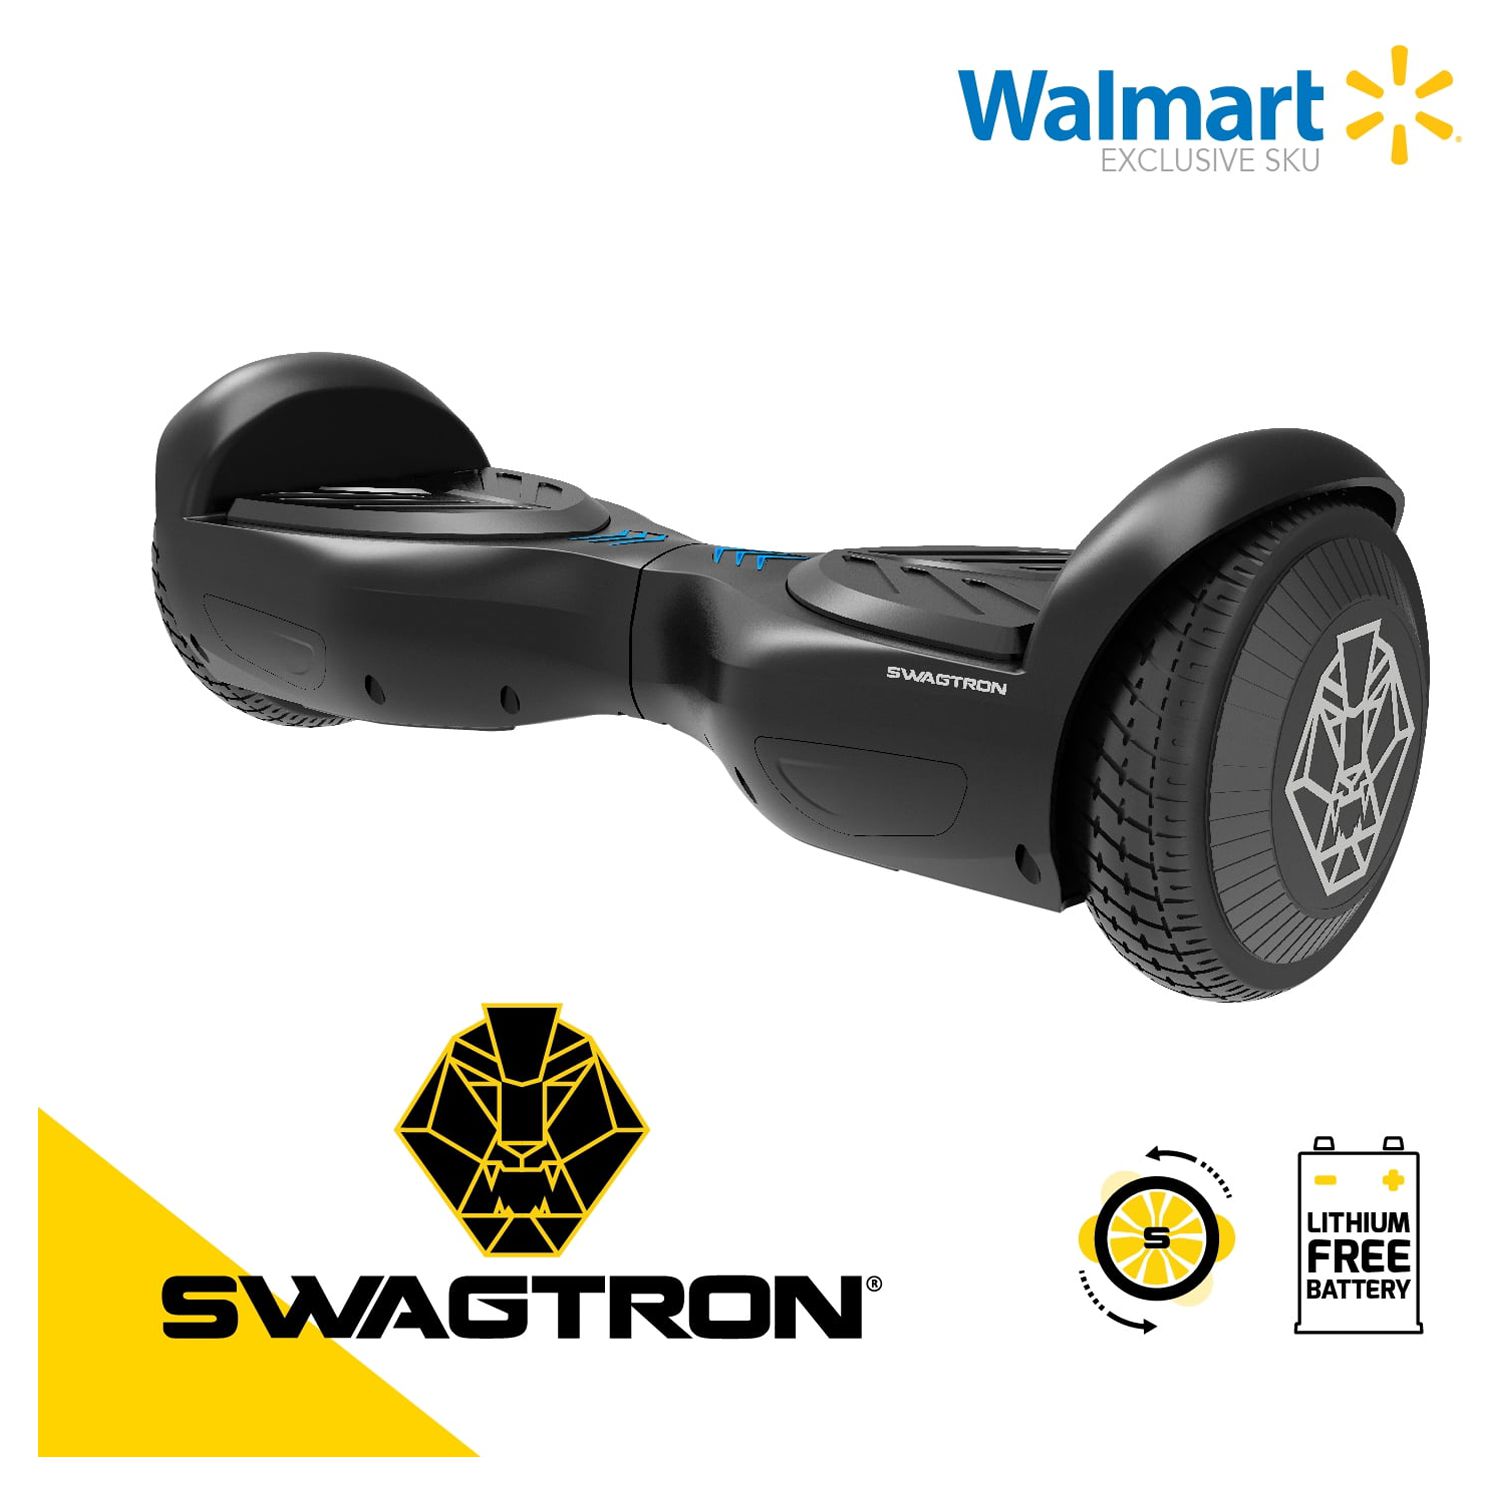 SWAGTRON Swagboard HERO Hoverboard, Dual 250W High-Torque Motors + Automatic Self-Balancing, UL2272-Compliant Lithium-Free Battery with SentryShield® Quantum Protection - image 1 of 6